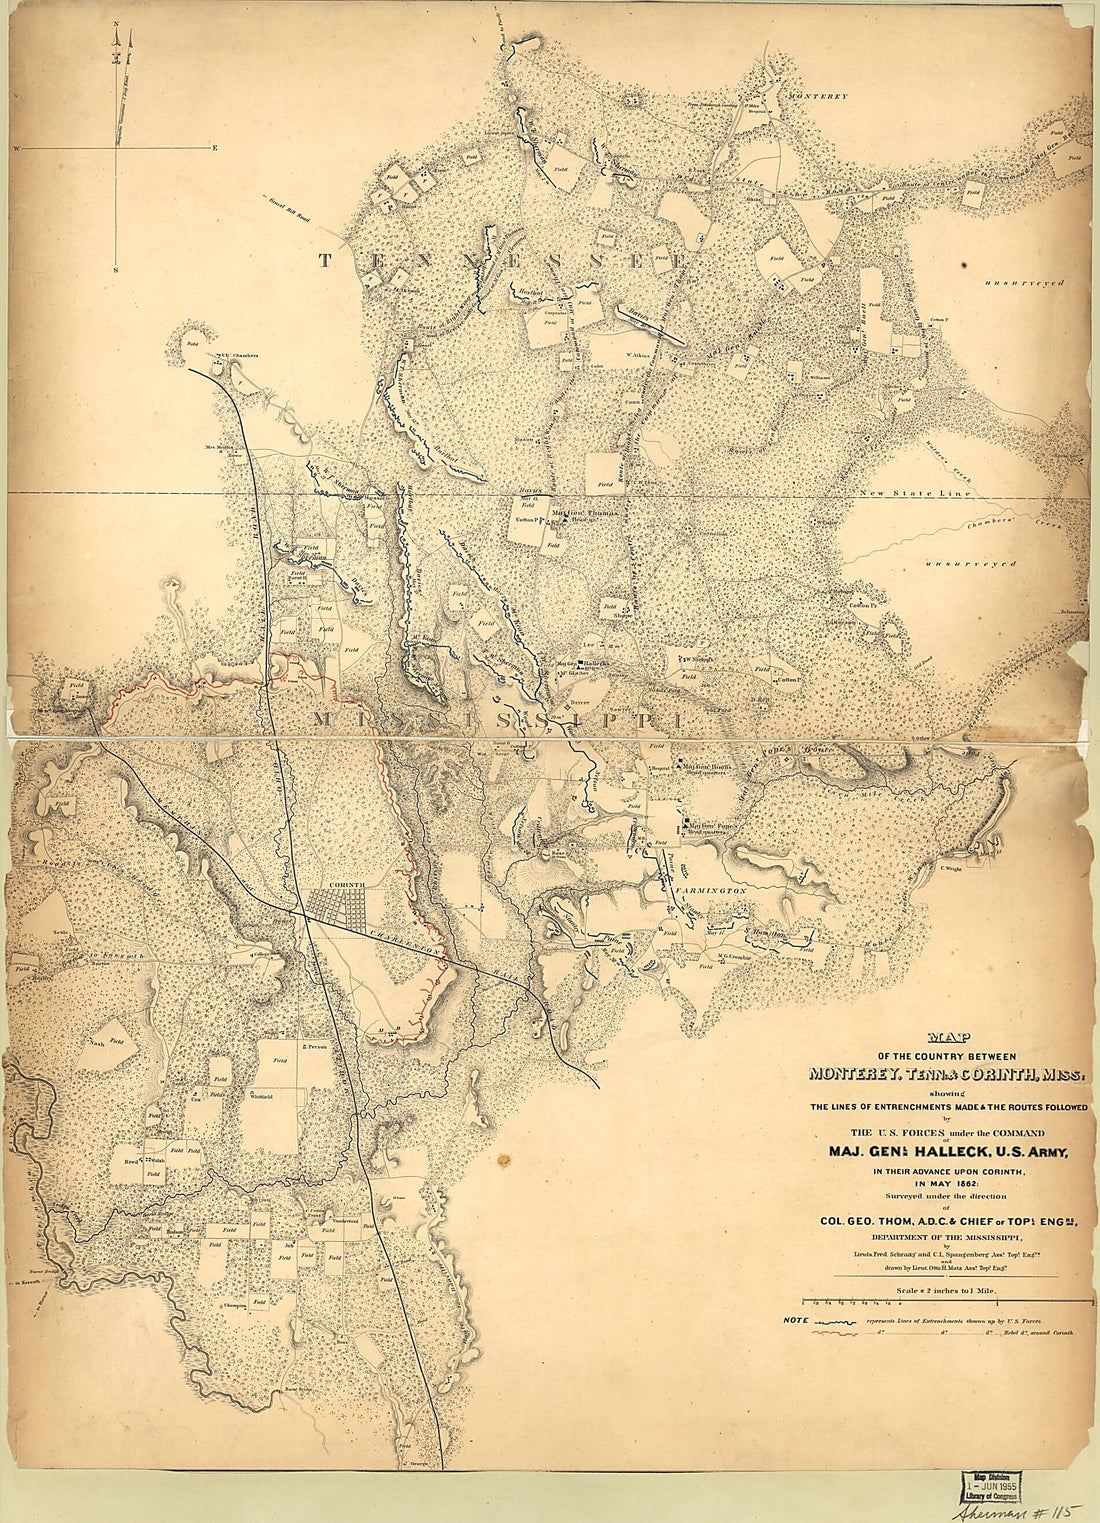 This old map of Map of the Country Between Monterey, Tenn: &amp; Corinth, Miss: Showing the Lines of Entrenchments Made &amp; the Routes Followed by the U.S. Forces Under the Command of Maj. Genl. Halleck, U.S. Army, In Their Advance Upon Corinth In May from 186